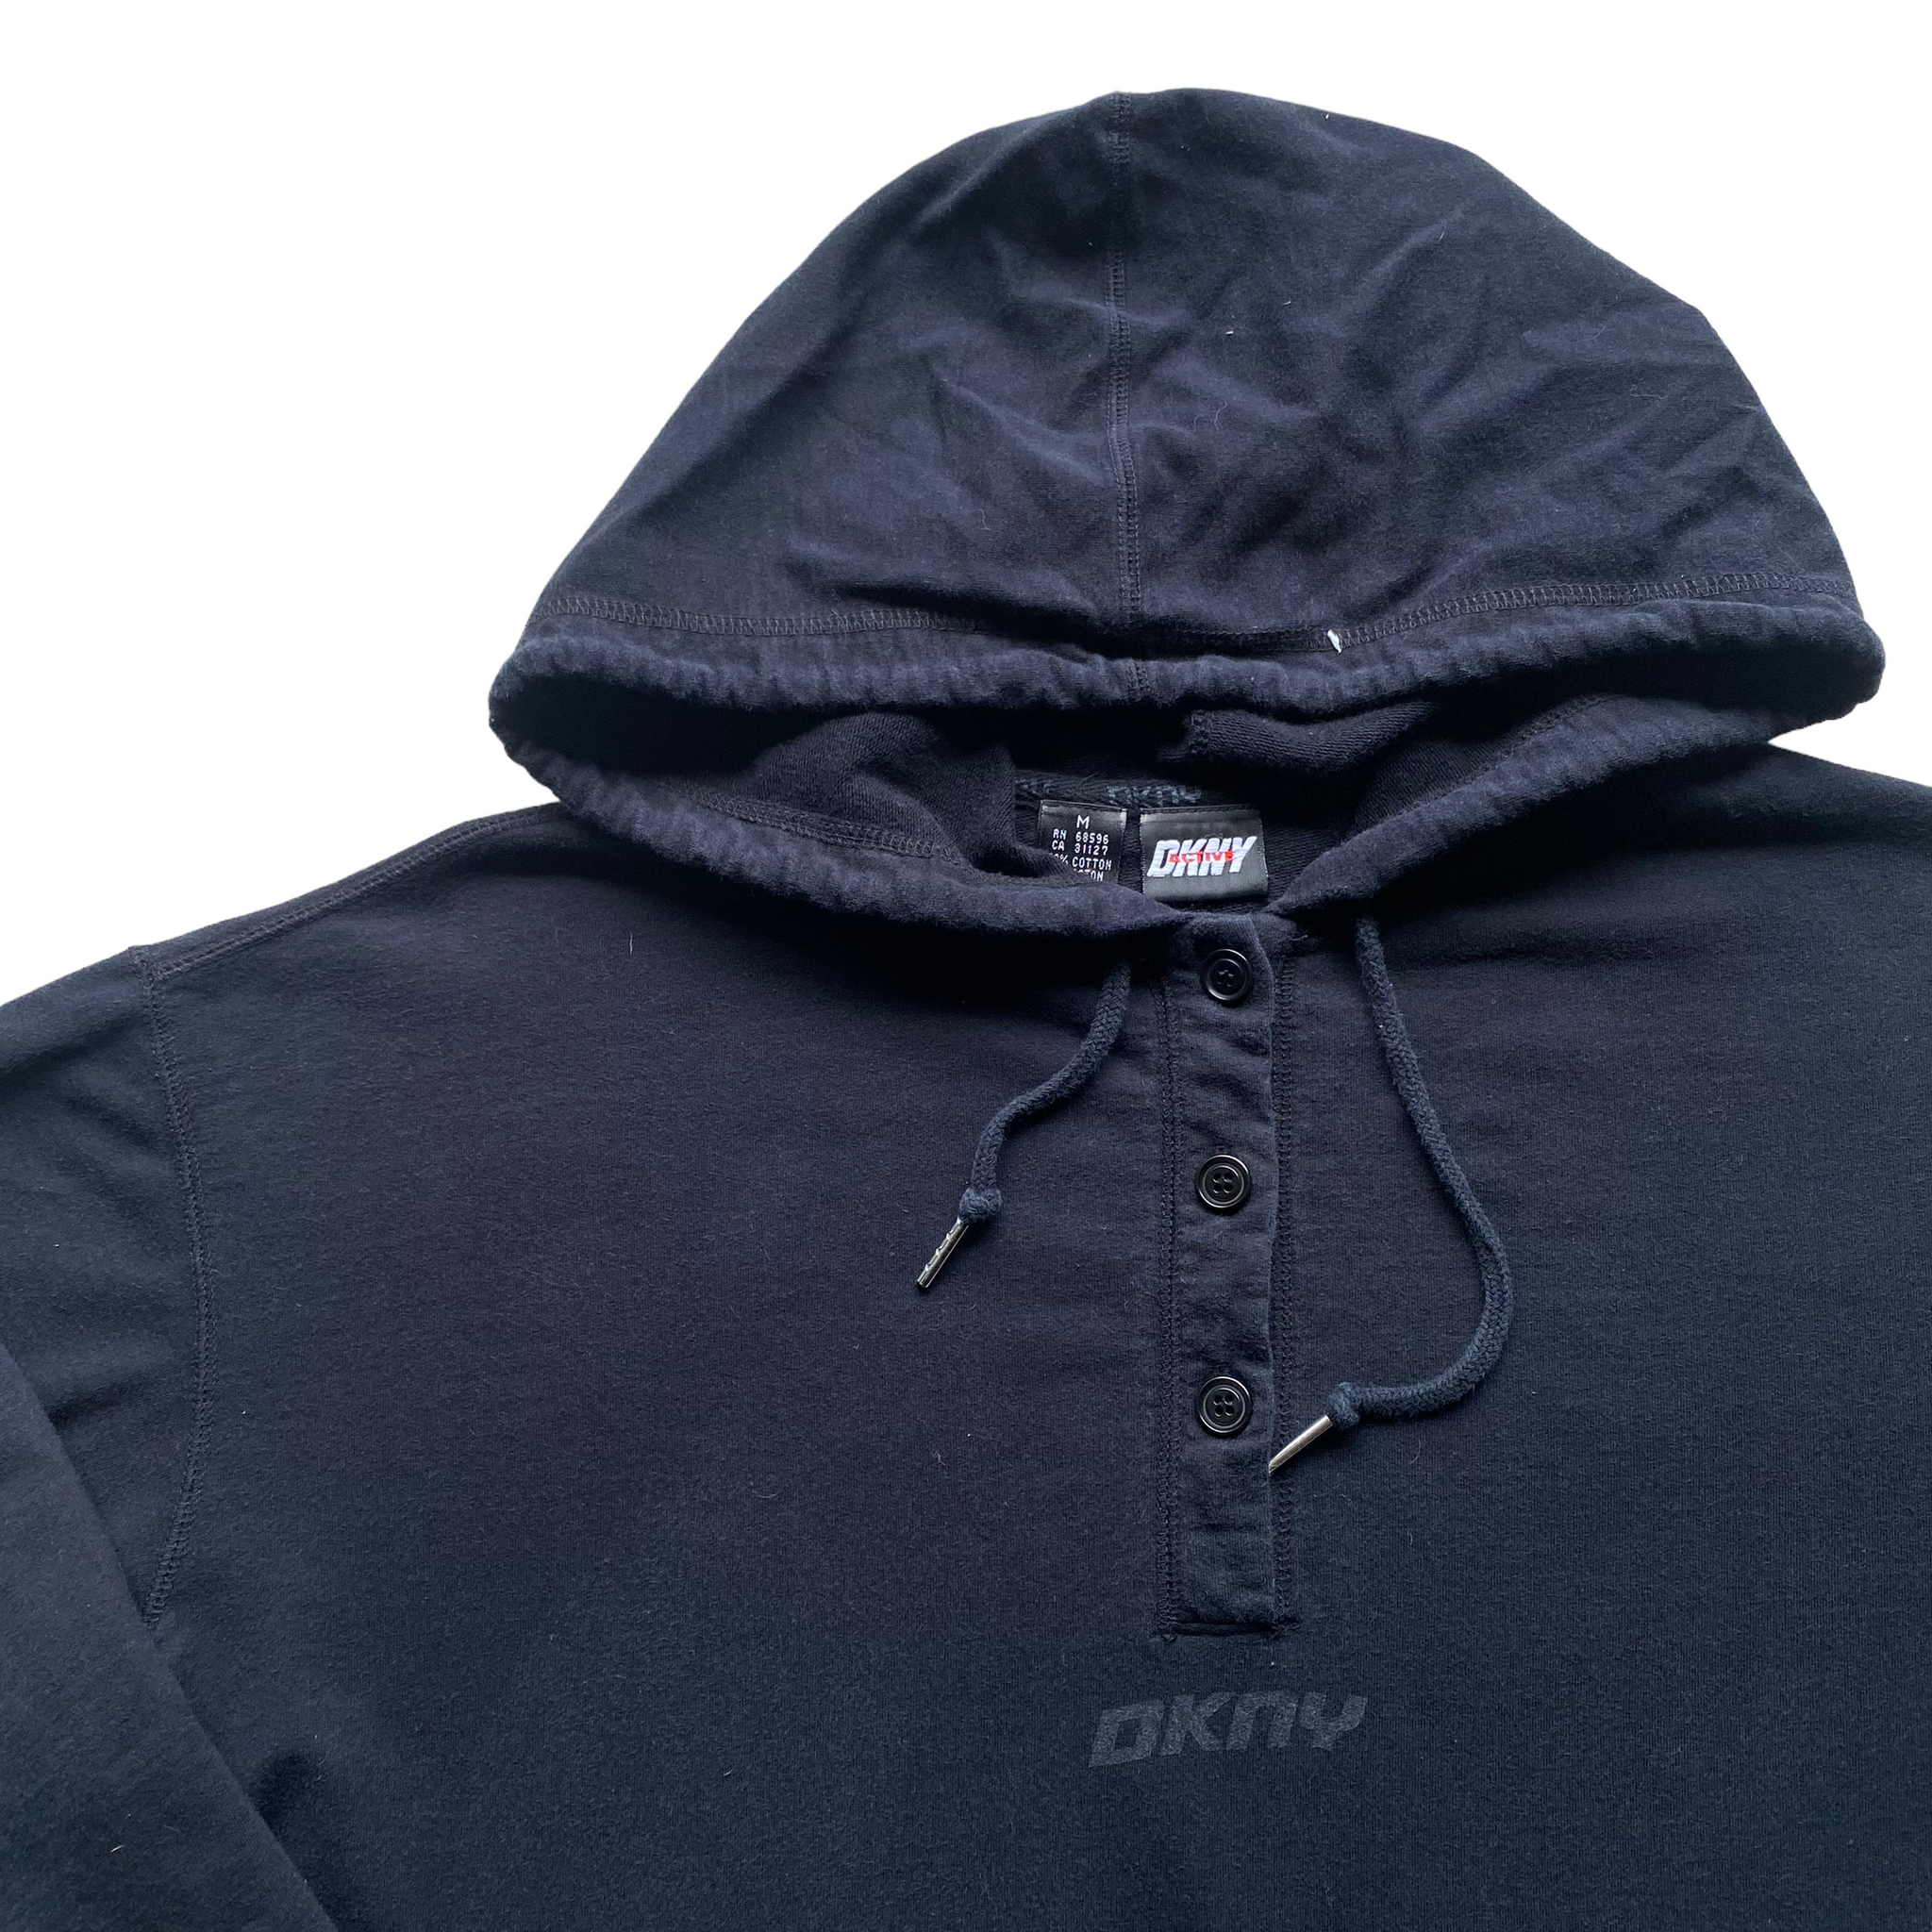 DKNY light weight hooded shirt  Large fit